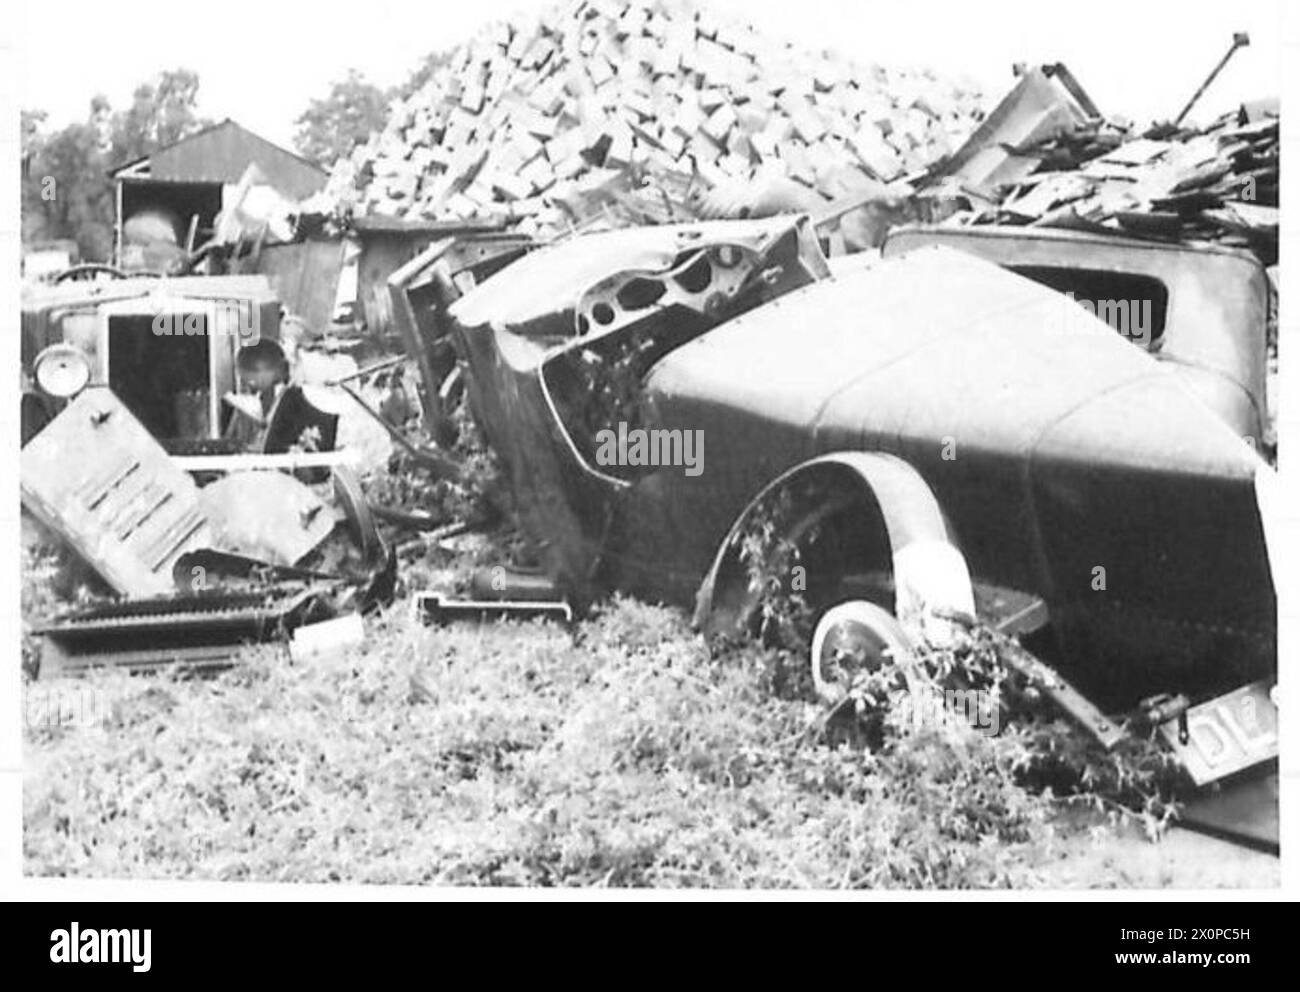 EXTENSIVE SALVAGE IN THE EASTERN COMMAND - Scrap metal. An old Italian Fiat racing car was amongst the scrap on the dump. Photographic negative , British Army Stock Photo